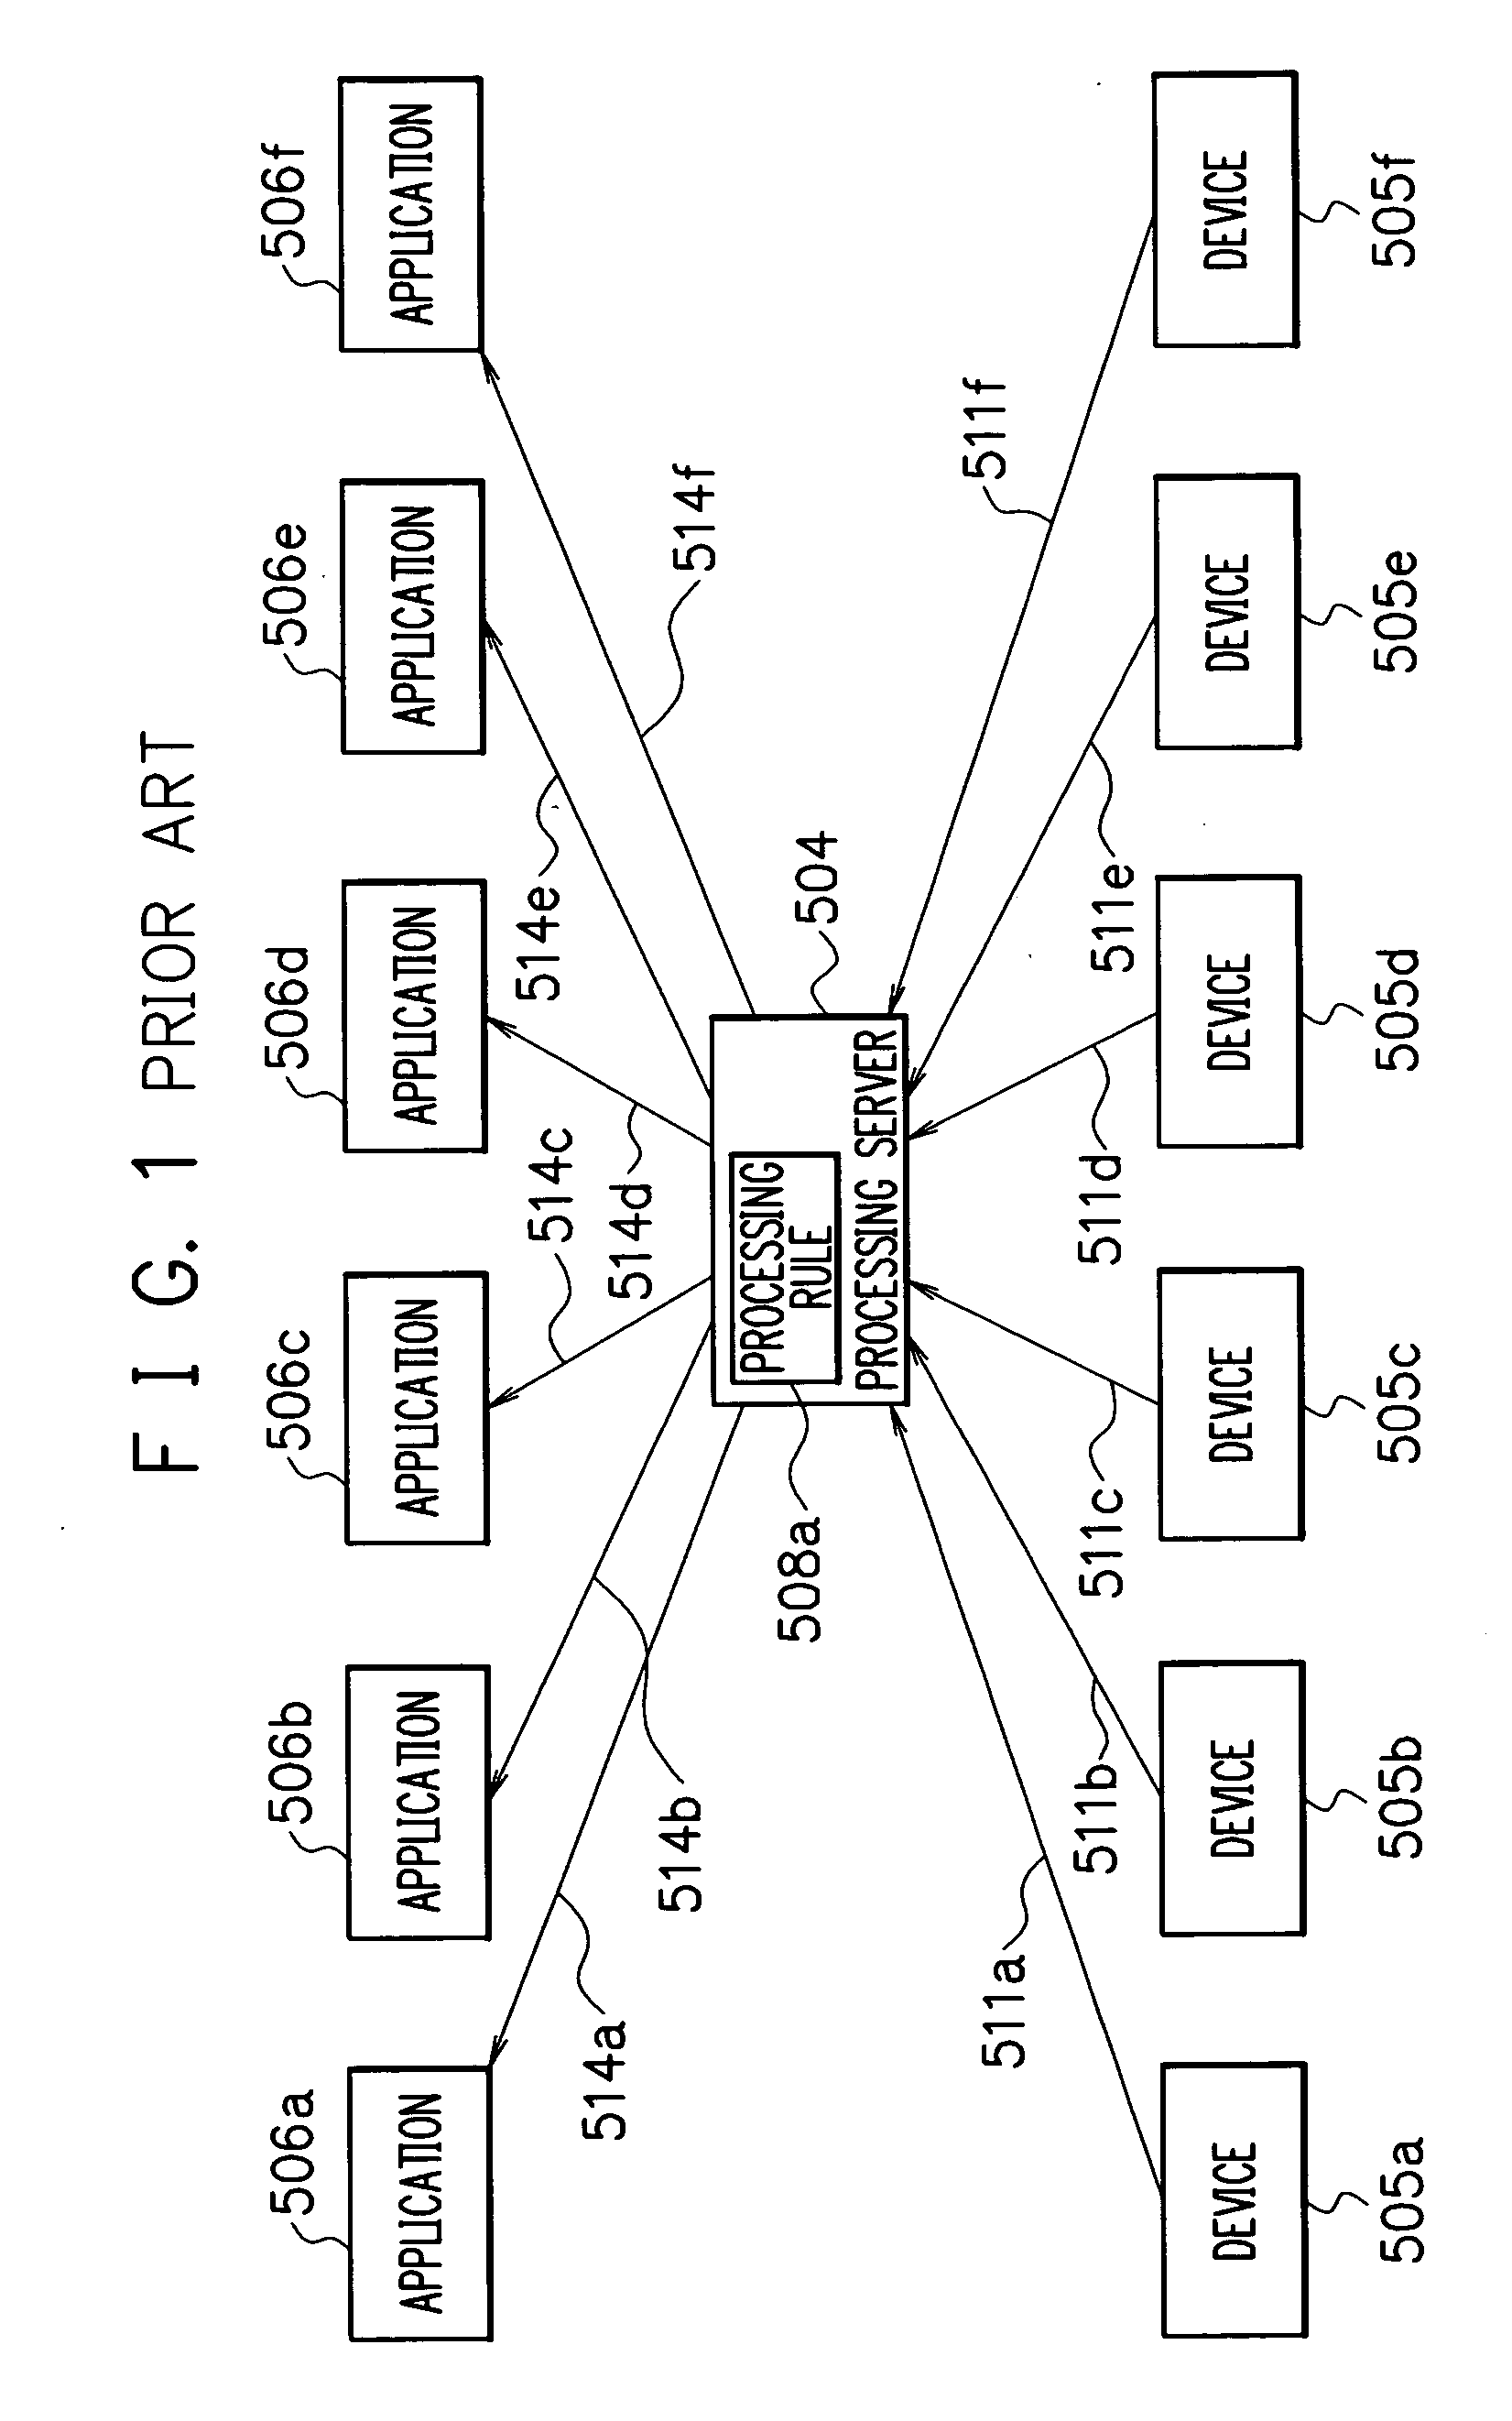 Load distribution system, and event processing distribution control apparatus, and an event processing distribution control program